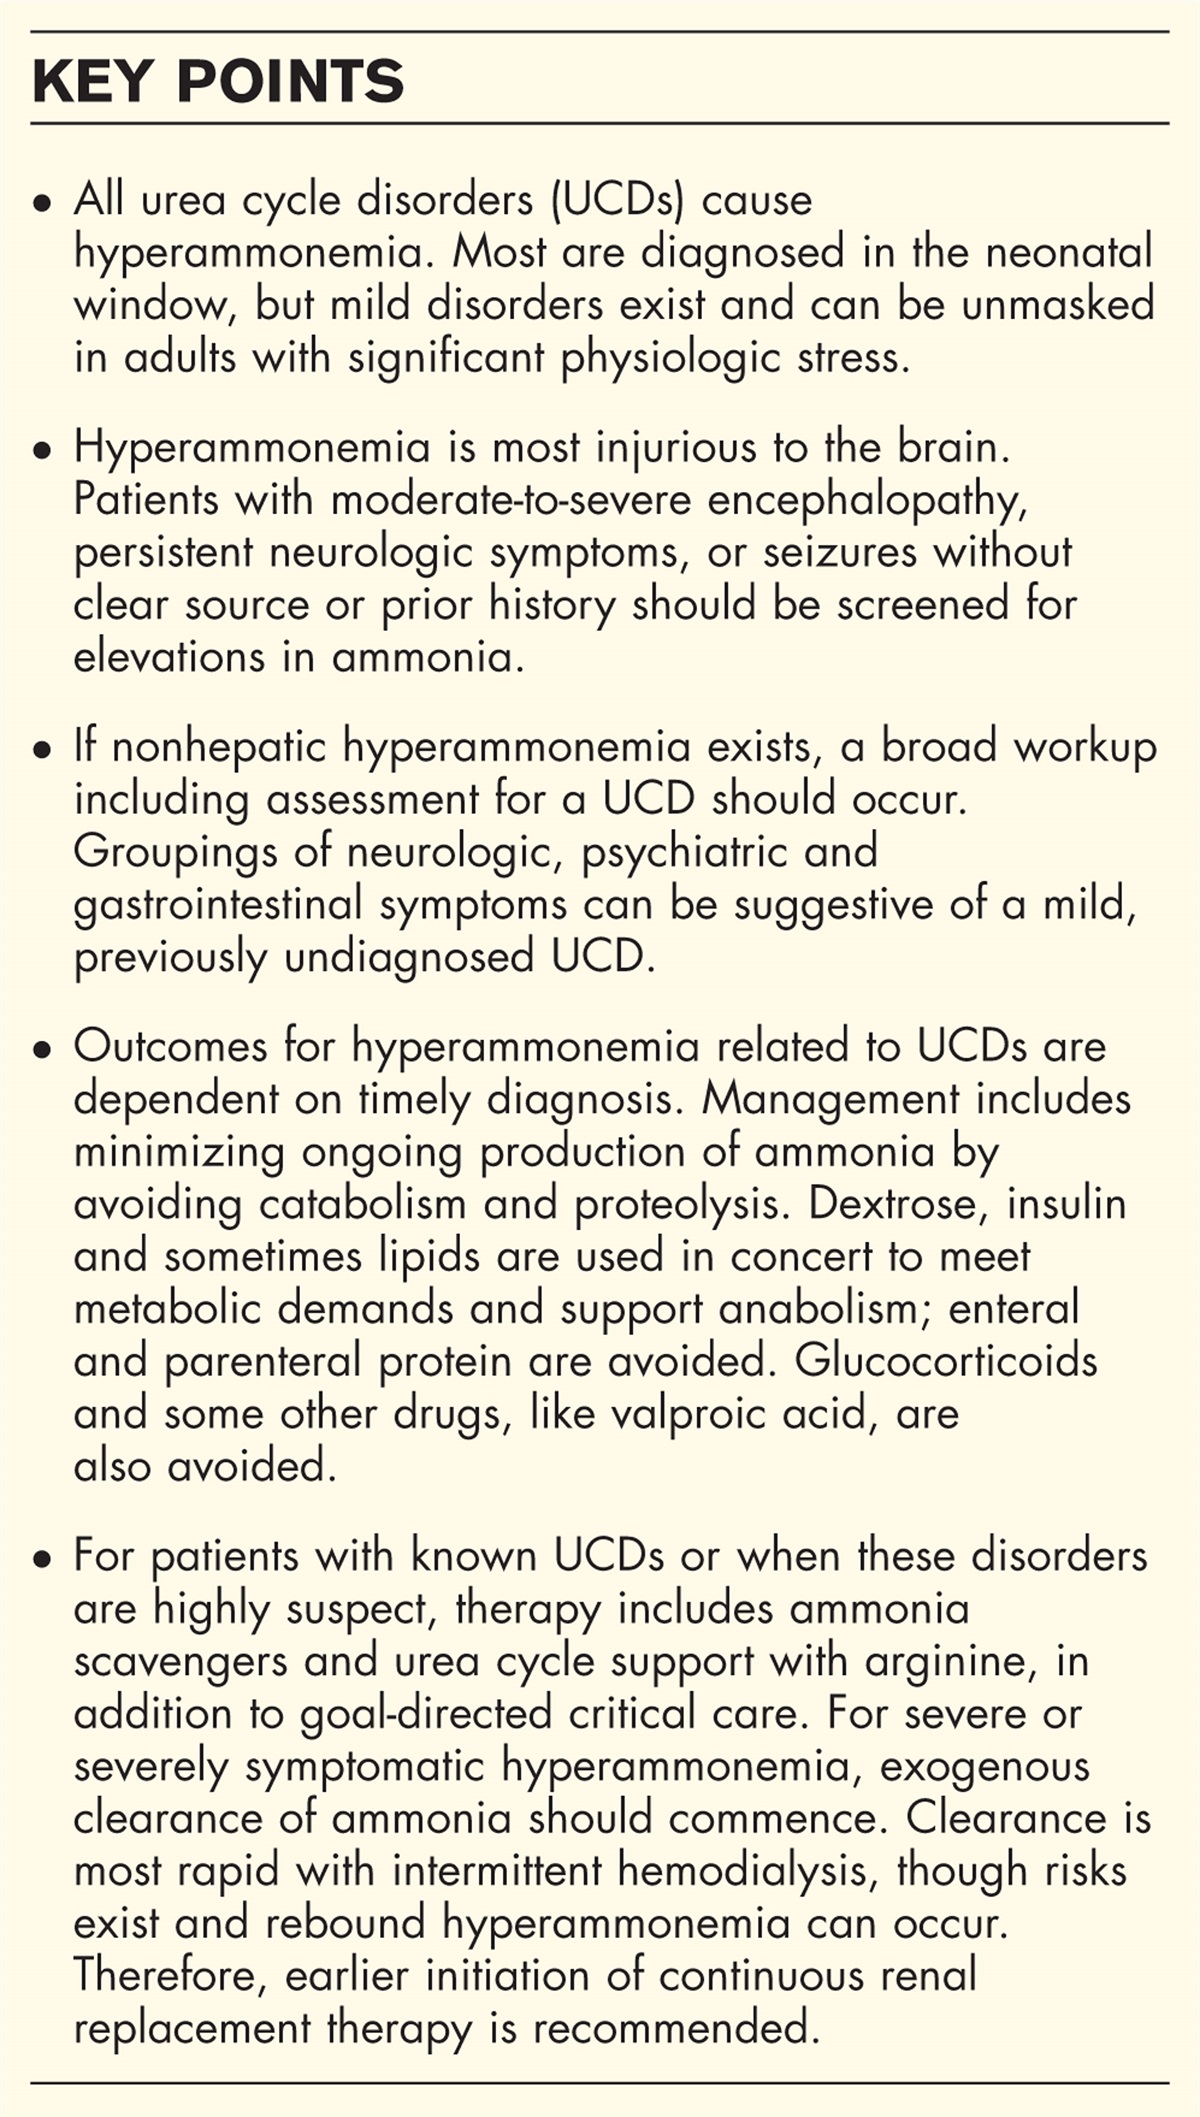 Urea cycle disorders in critically Ill adults